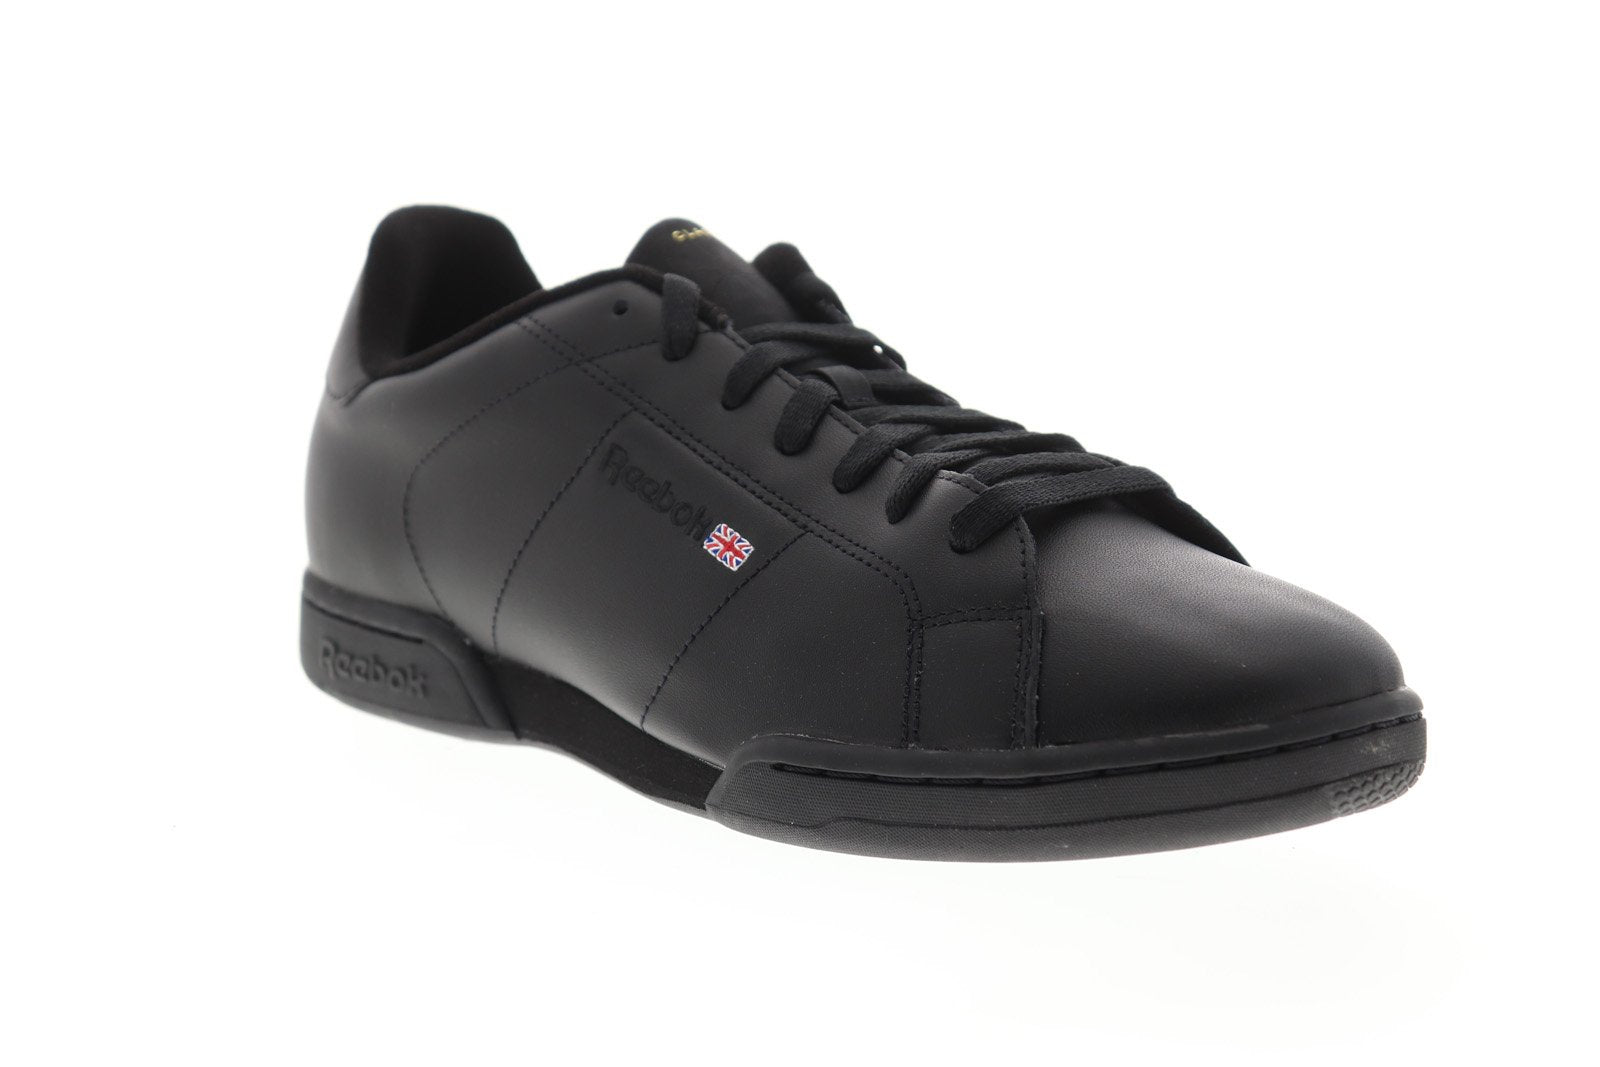 Reebok II 6836 Mens Leather Casual Top Lifestyle Sneaker - Shoes